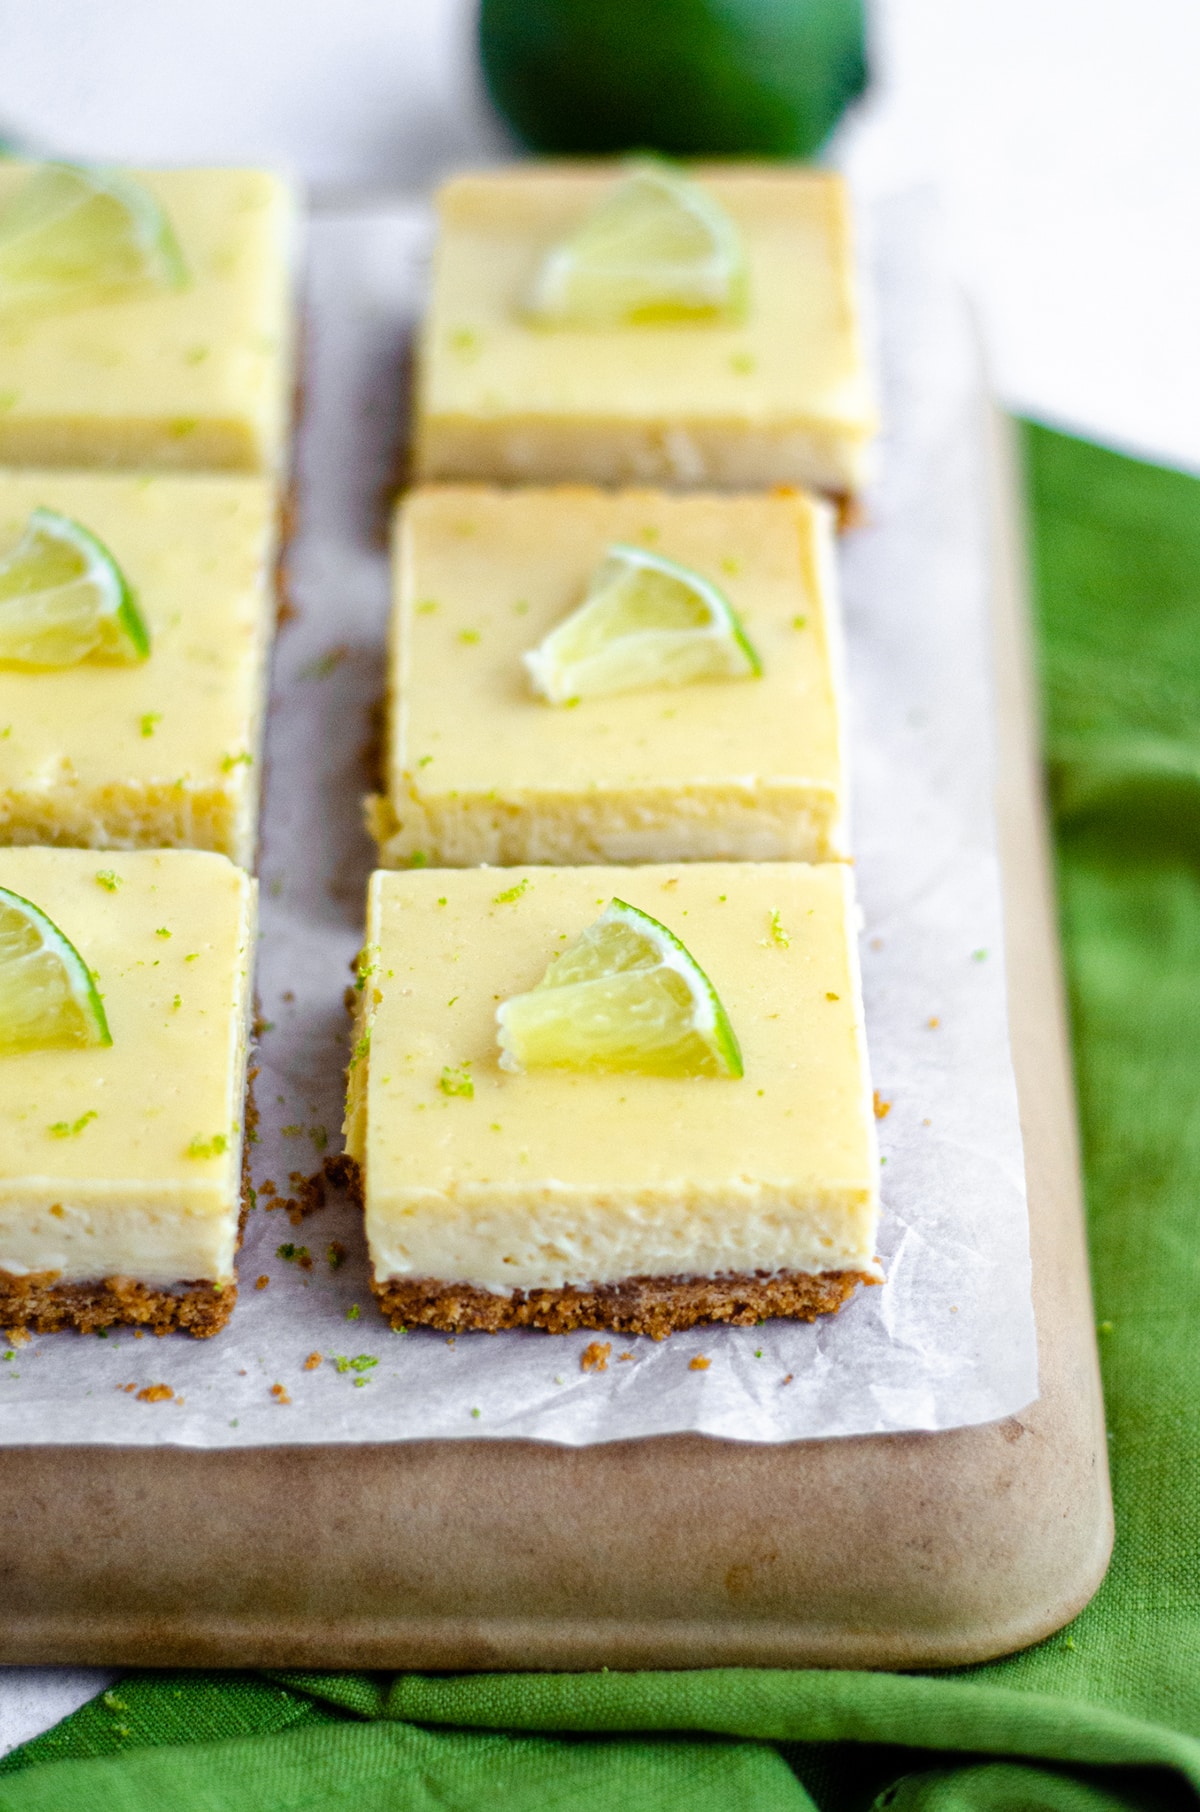 Key Lime Pie Bars: A creamy, tart Key lime pie filling sits on top of a buttery graham cracker crust... It's so much easier than making a whole pie!